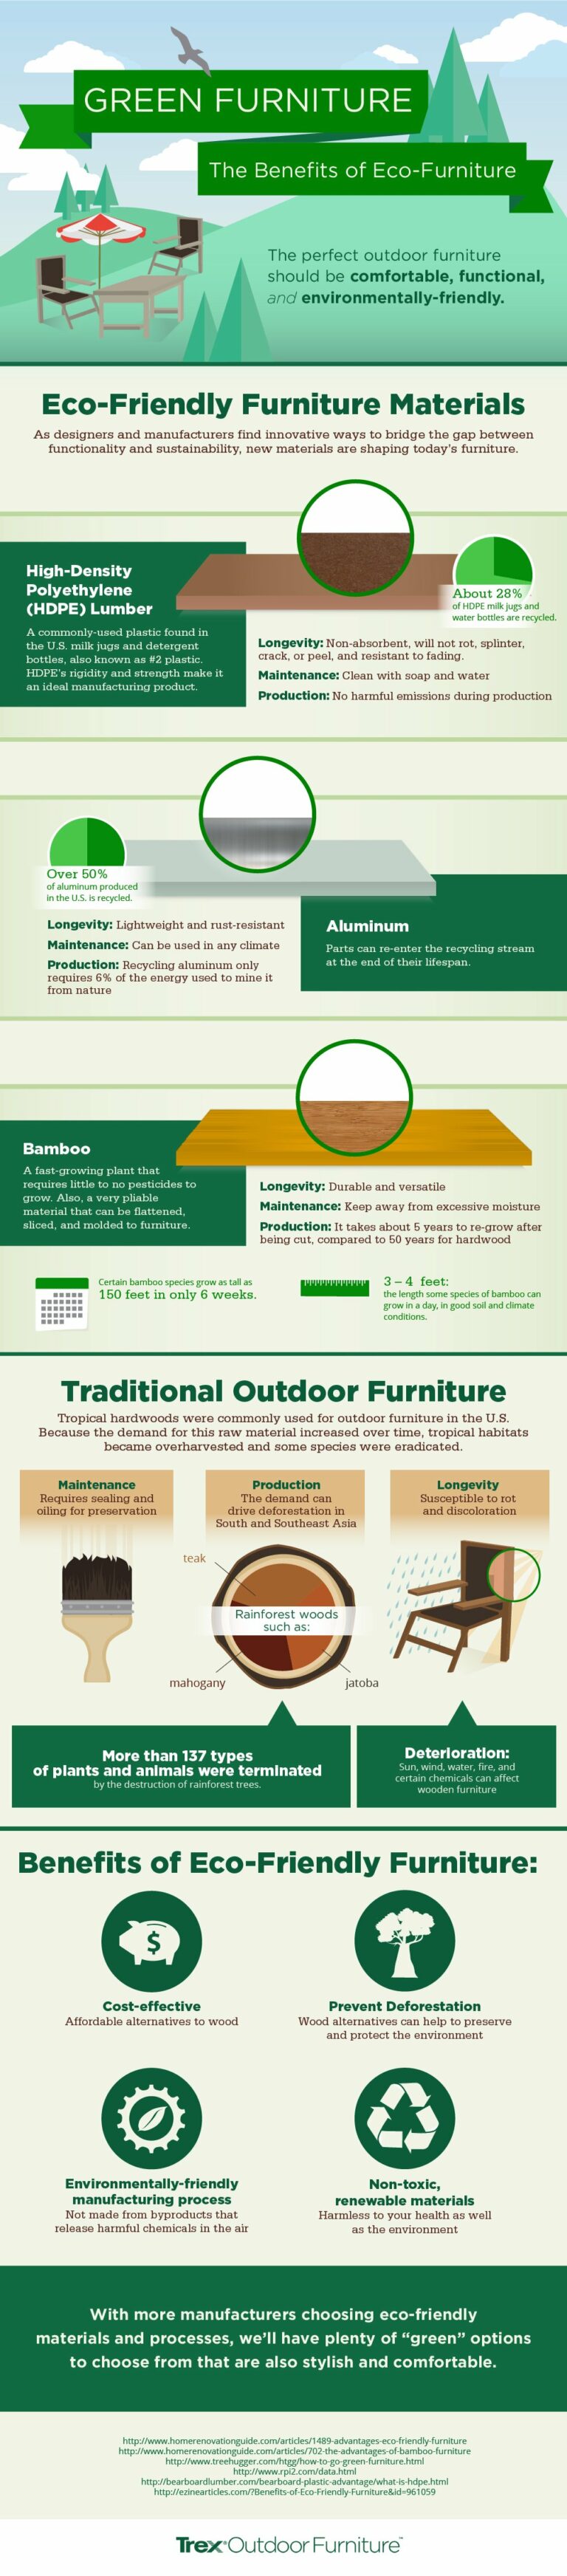 What Is The Lifespan Of Eco-Friendly Furniture?